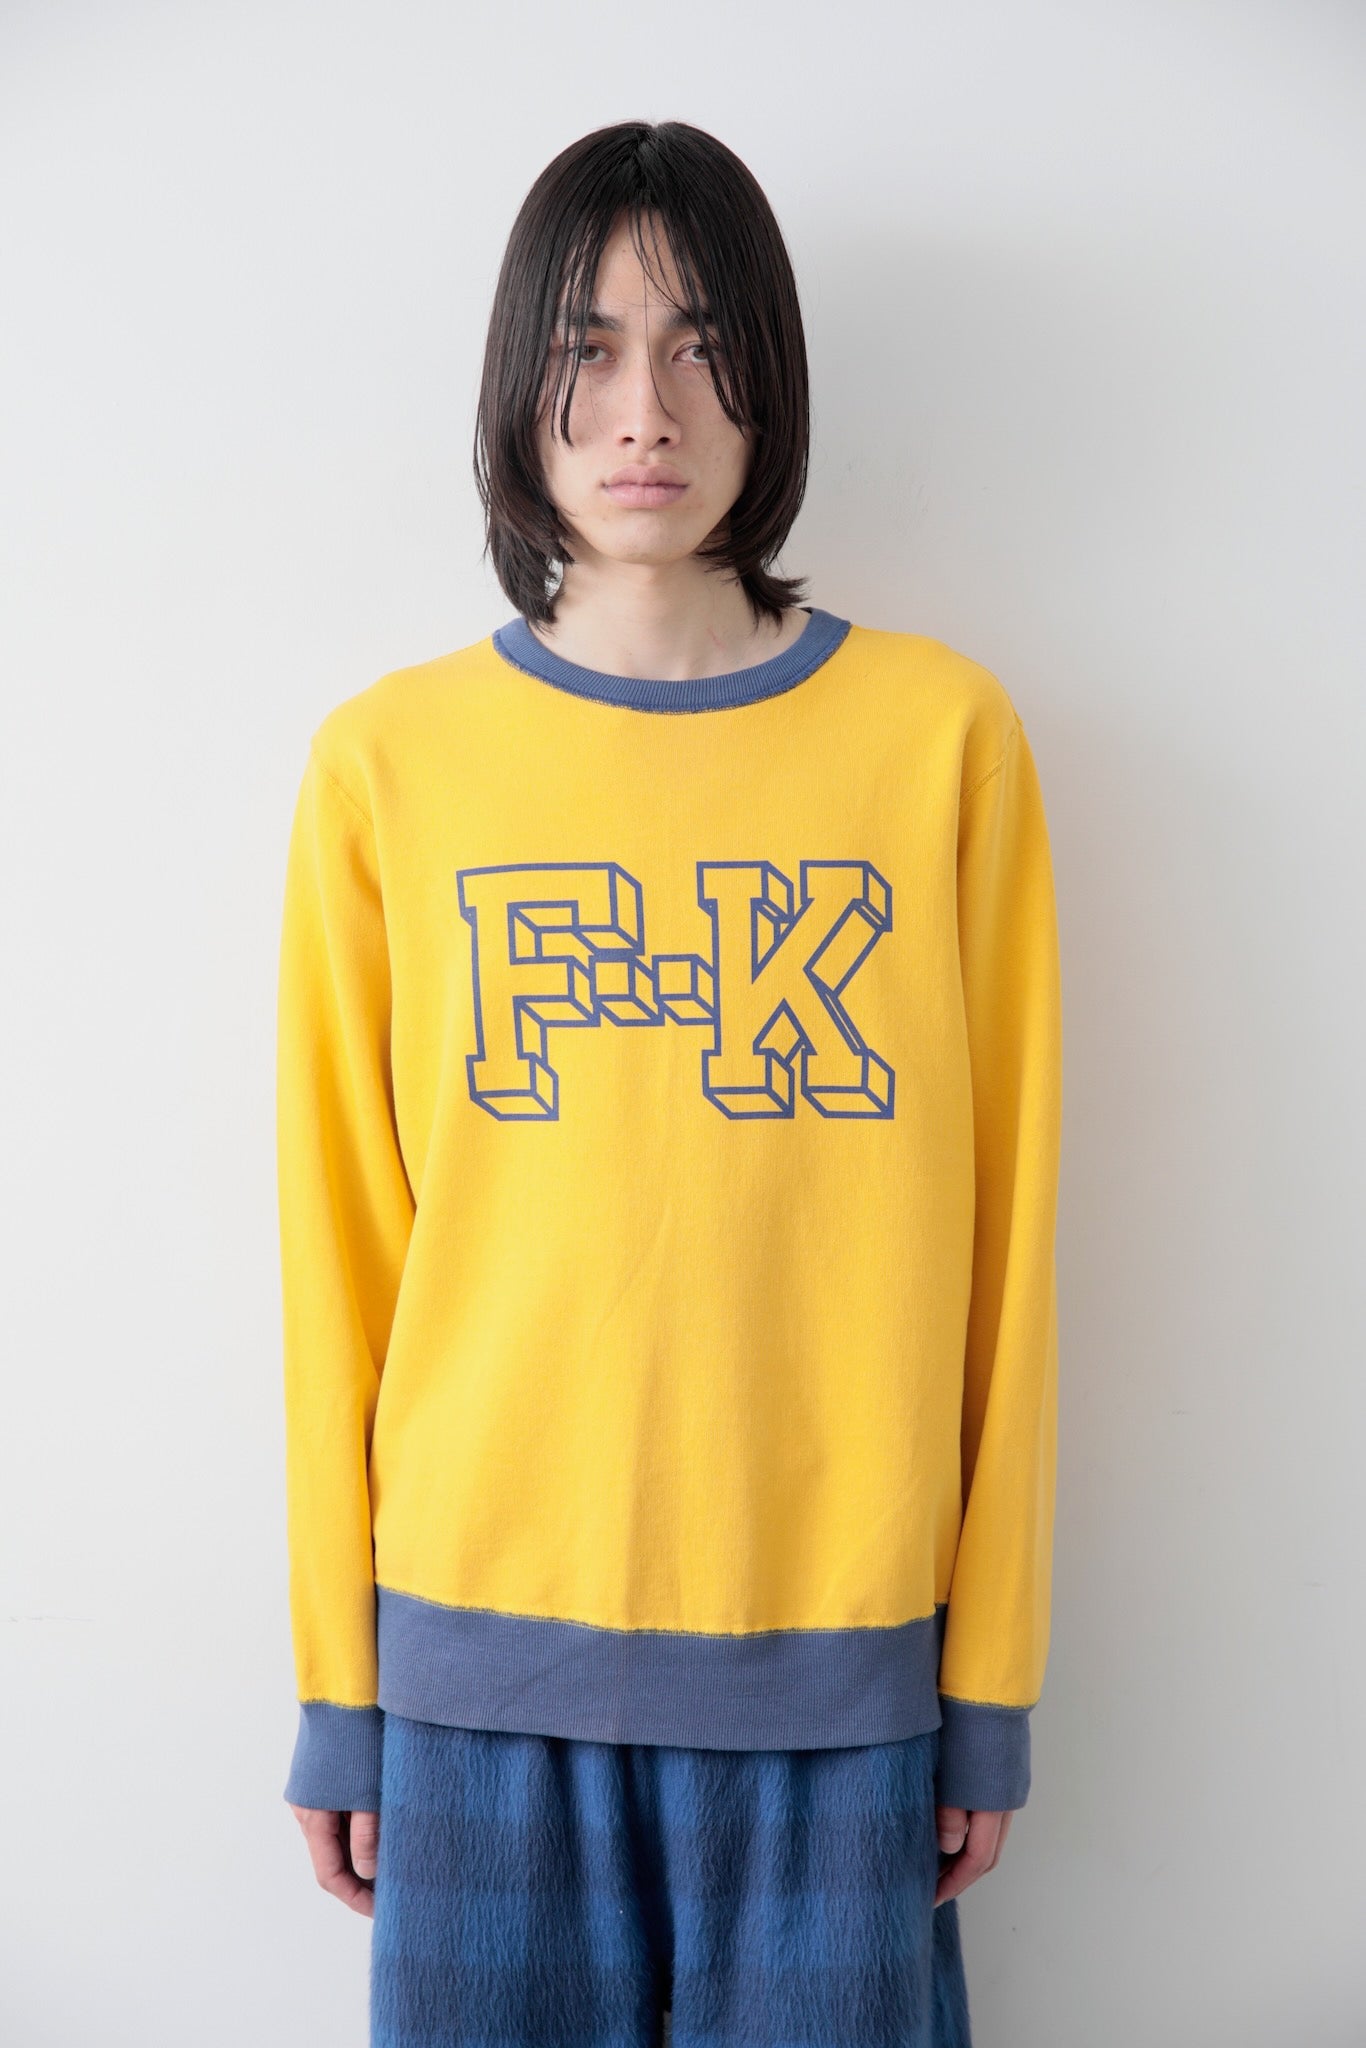 2000s HYSTERIC GLAMOUR LOGO SWEAT TOP